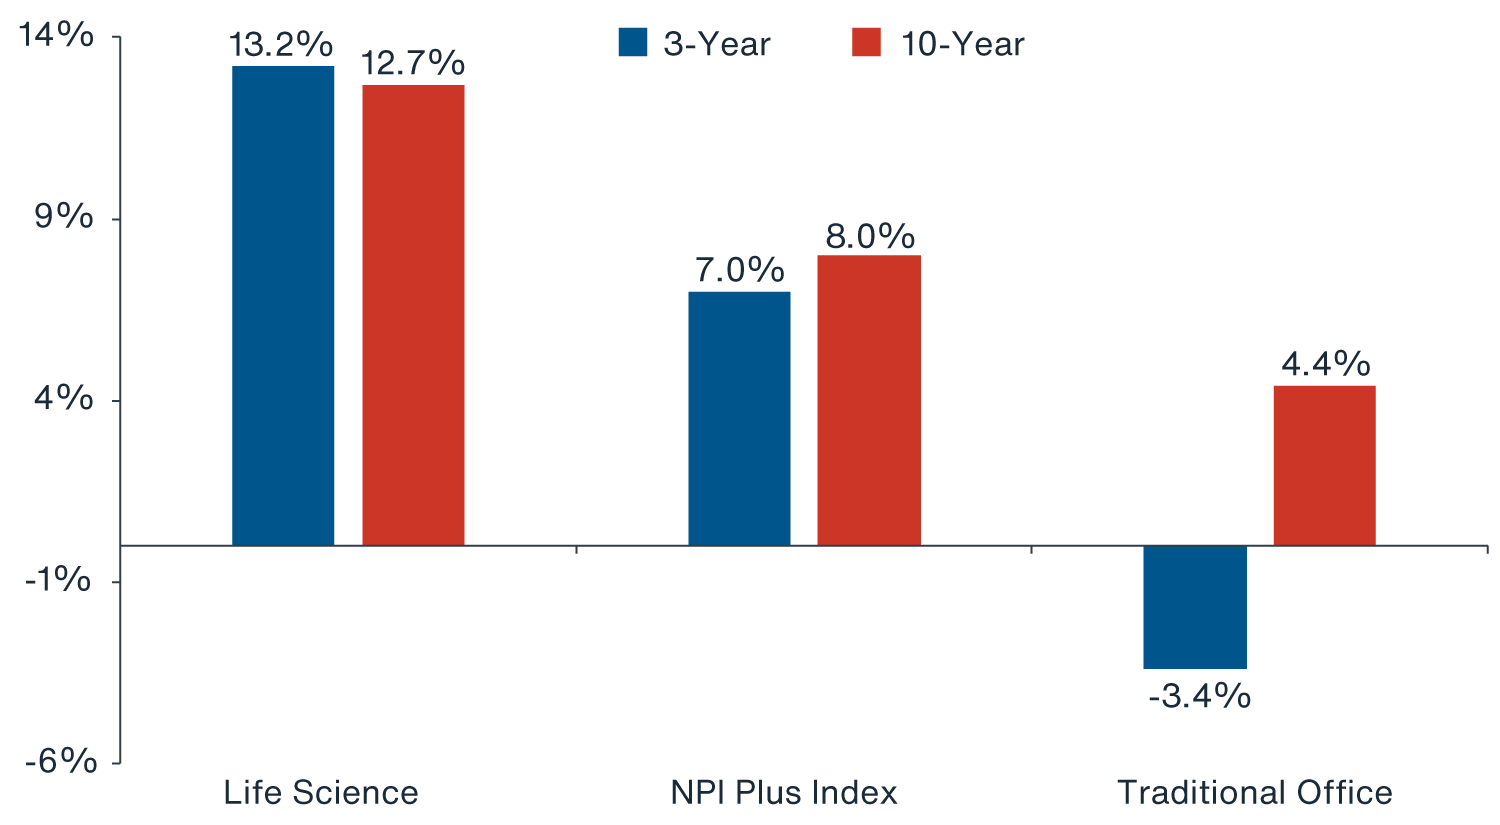 Chart showing that life sciences investments have outperformed over the past 10 years compared to NPI Plus Index & Trad. Office